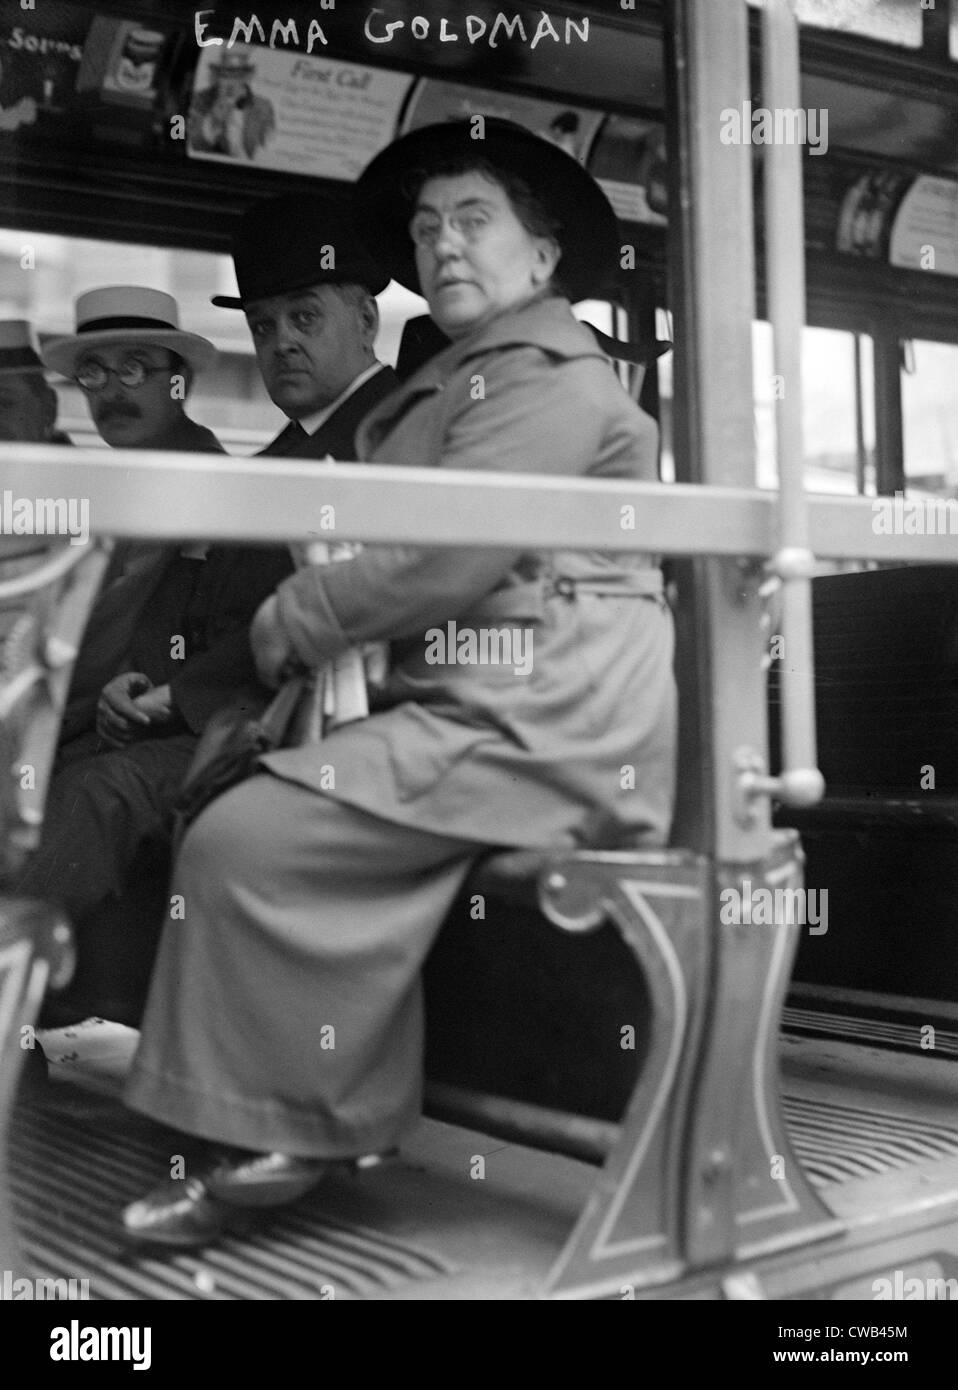 Emma Goldman and Alexander Berkman (with glasses) on a streetcar in San Francisco. Anarchists and radical revolutionaries, they Stock Photo